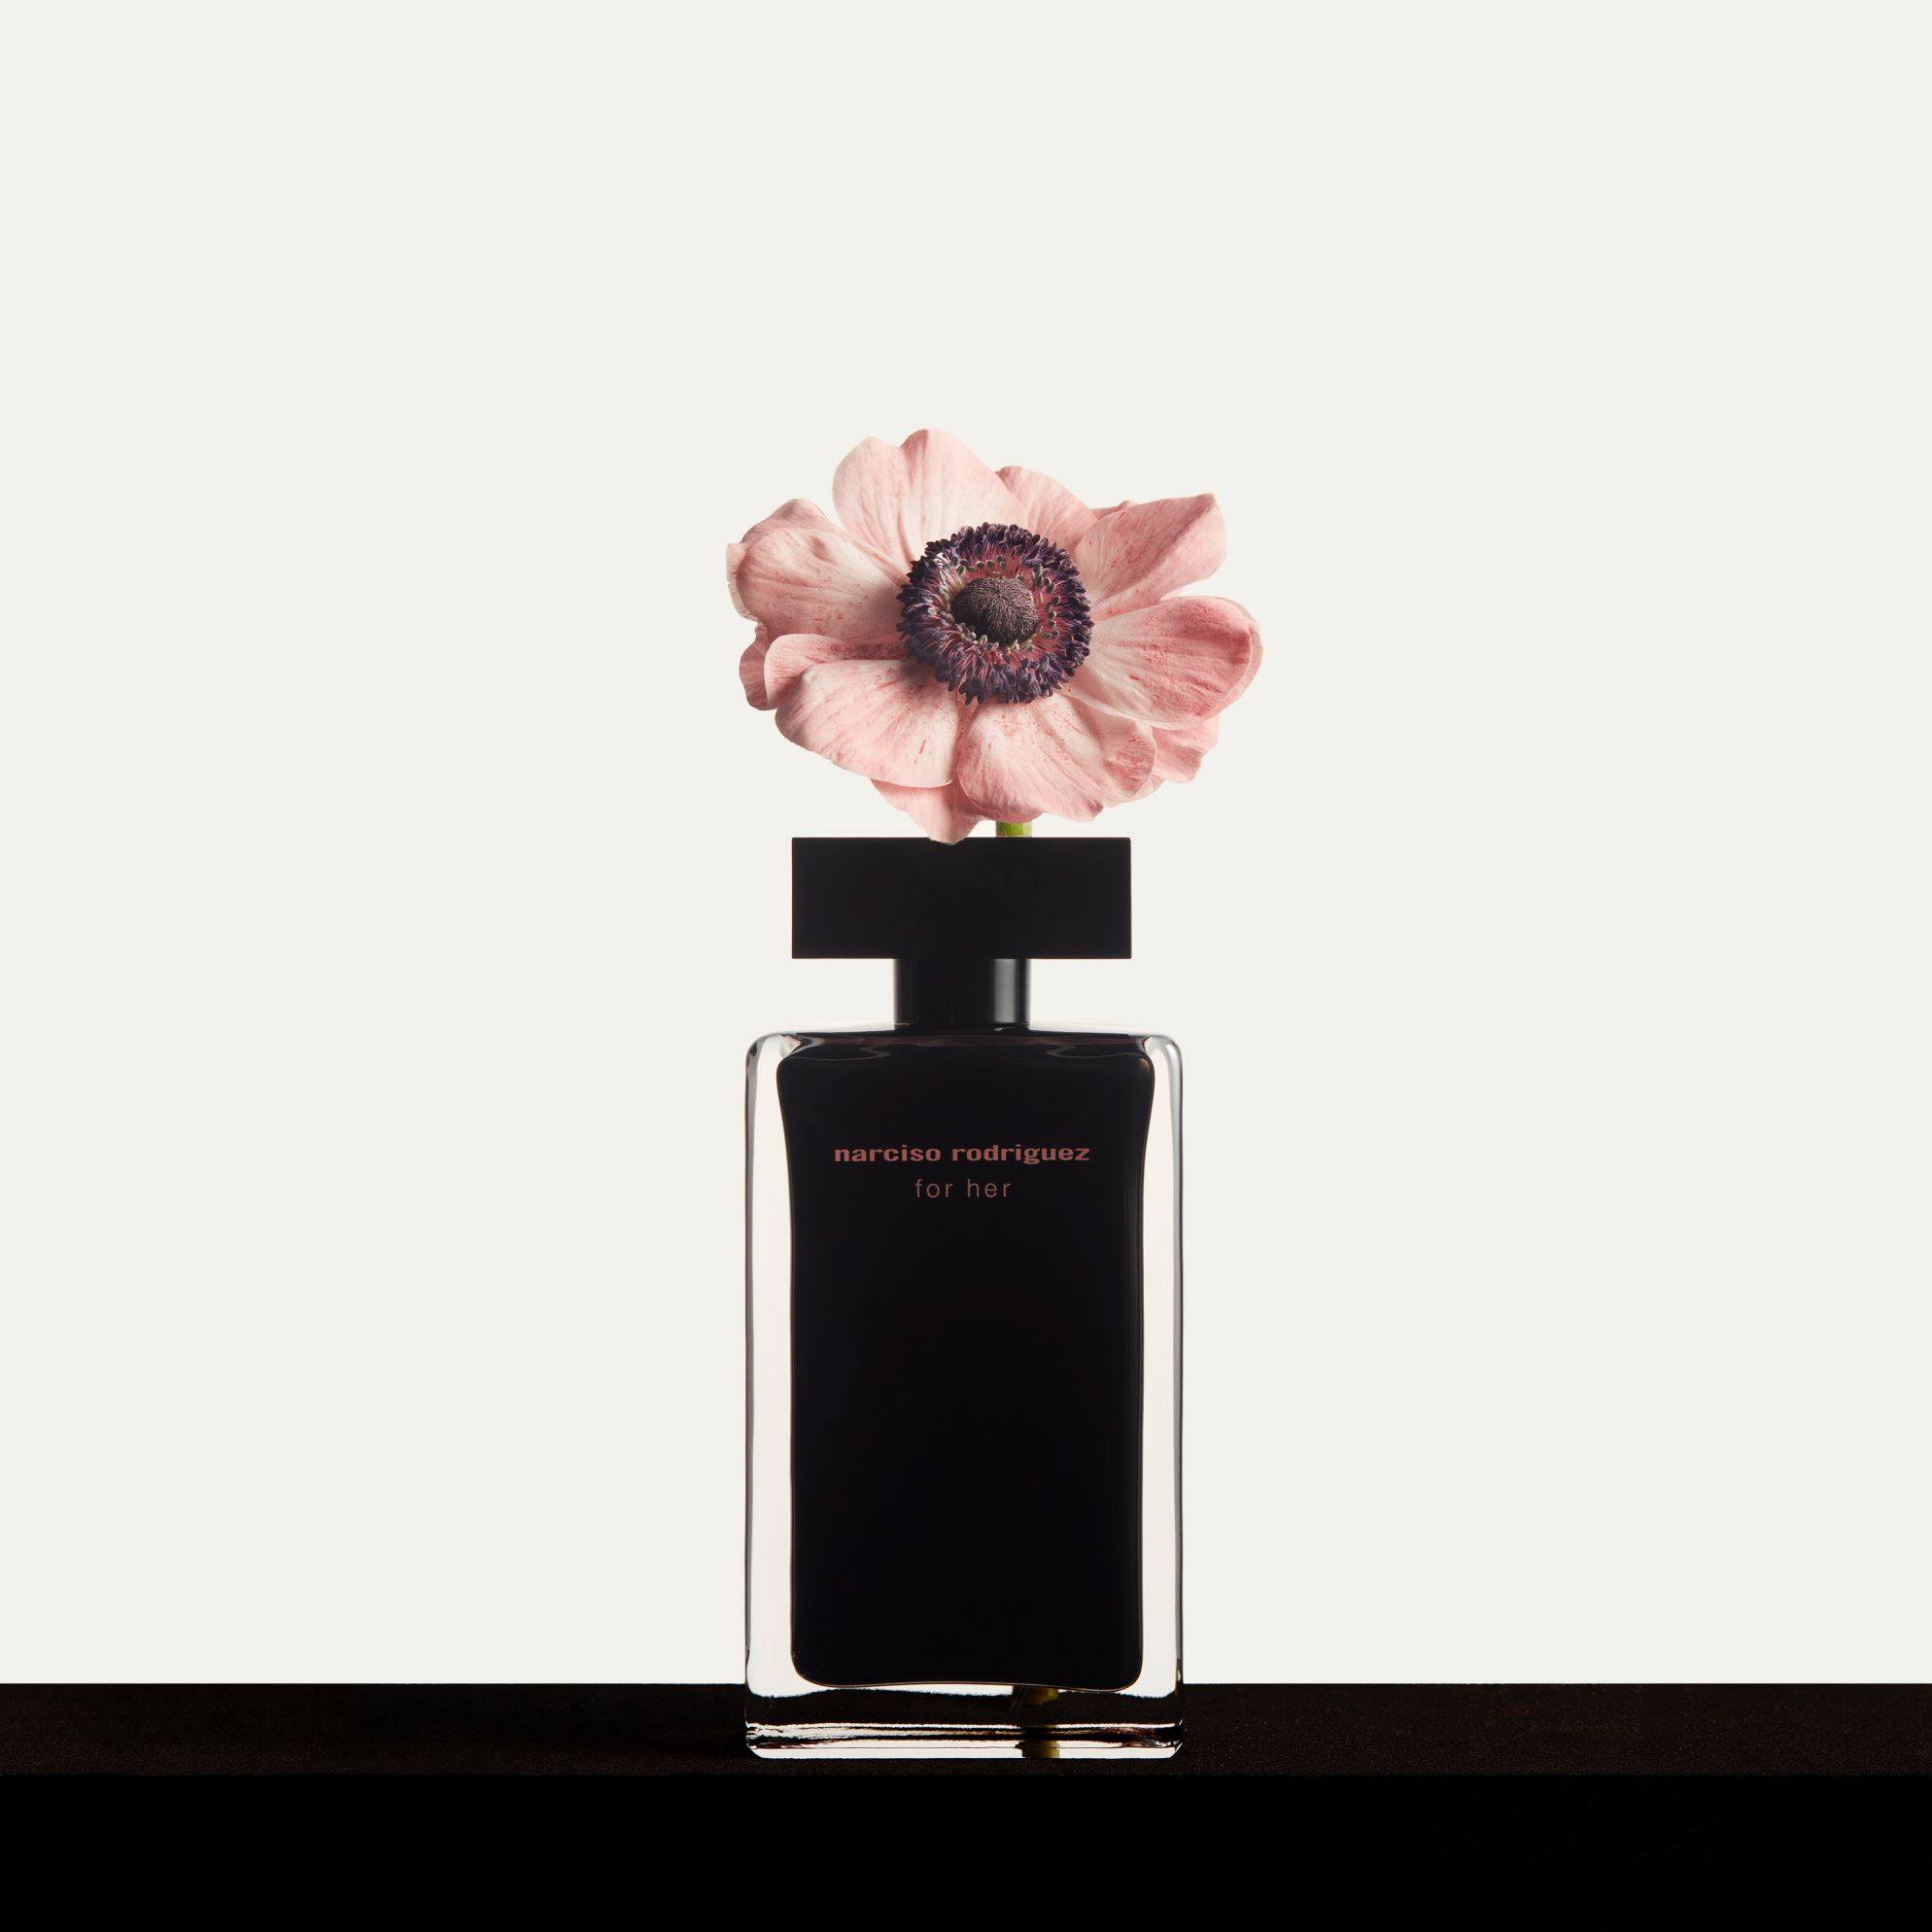 Narciso Rodriguez, Narciso Rodriguez รีวิว, Narciso Rodriguez ราคา, Narciso Rodriguez For Her, Narciso Rodriguez For Her รีวิว, Narciso Rodriguez For Her Eau de Toilette, Narciso Rodriguez For Her Eau de Toilette รีวิว, Narciso Rodriguez For Her Eau de Toilette 7.5ml, Narciso Rodriguez For Her Eau de Toilette 7.5ml (With Box) น้ำหอมผู้หญิง, น้ำหอม, น้ำหอมผู้หญิง